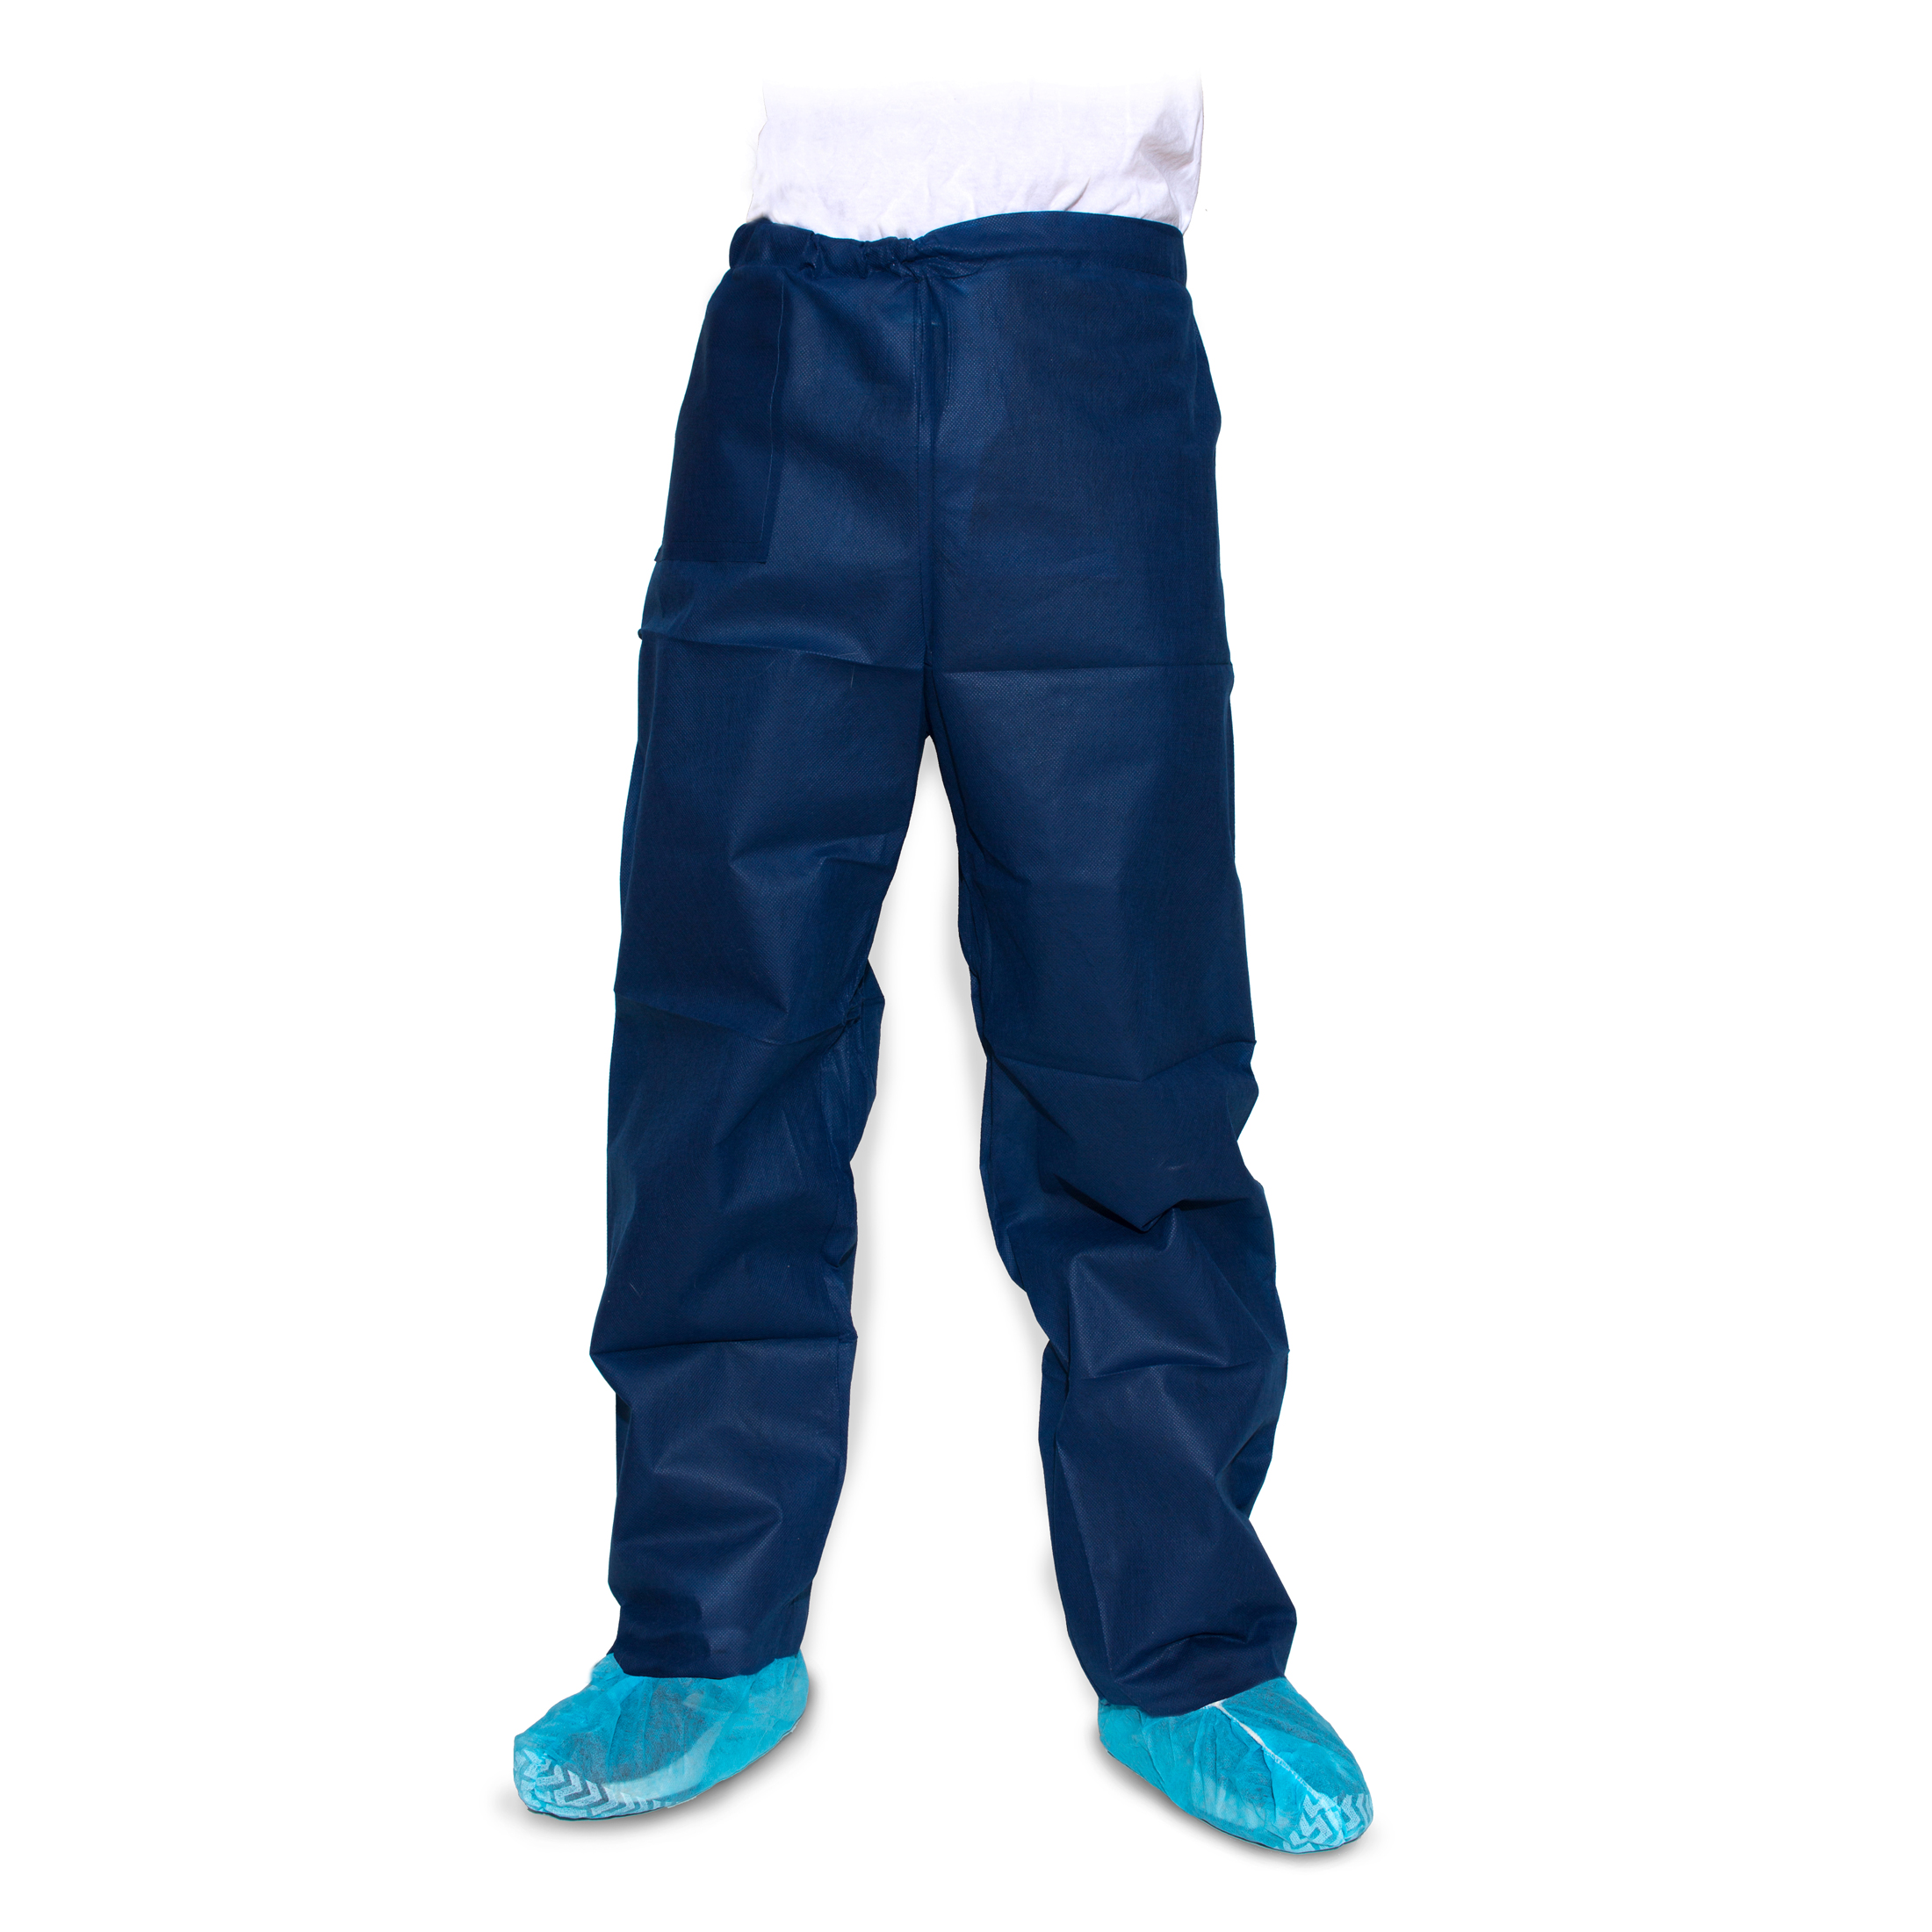 Pants Products, Supplies and Equipment